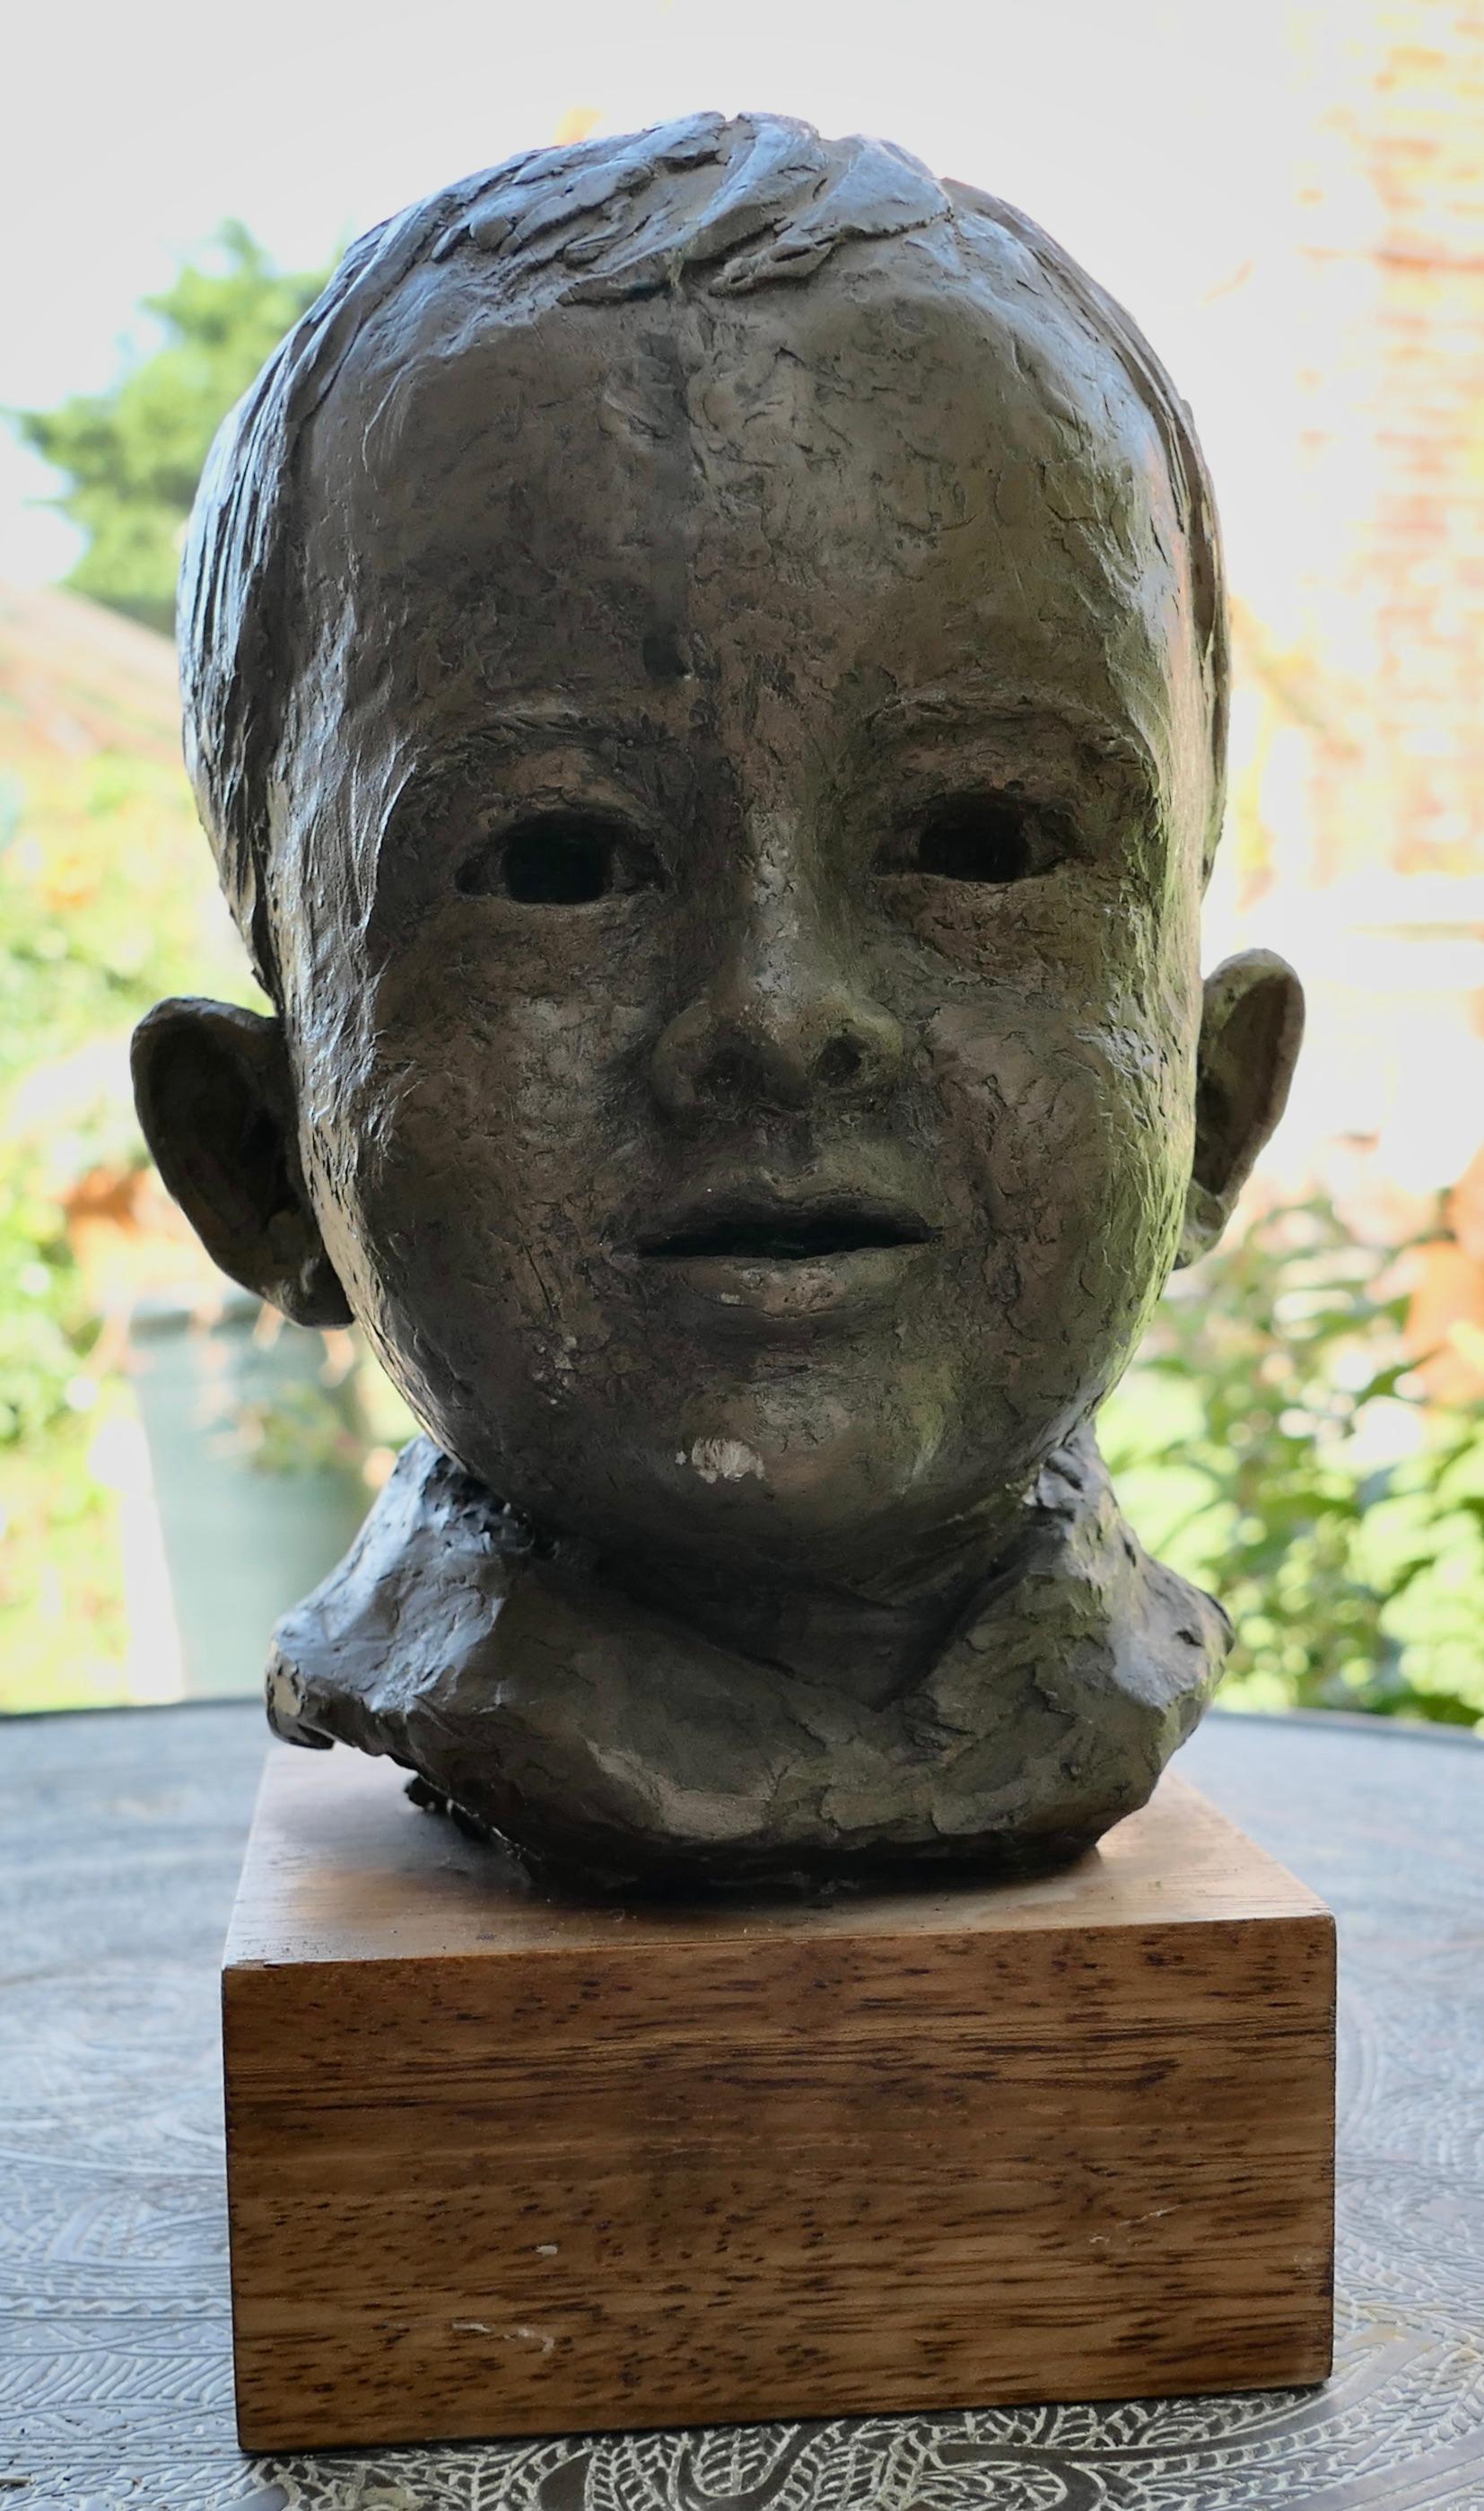 Artist’s Model Bust of a Very Young Smiling Boy, signed and dated

This is a very attractive hand made piece dating from the middle of the 20th Century, it was discovered in an Art Studio during refurbishment 

It is a three dimensional head made in